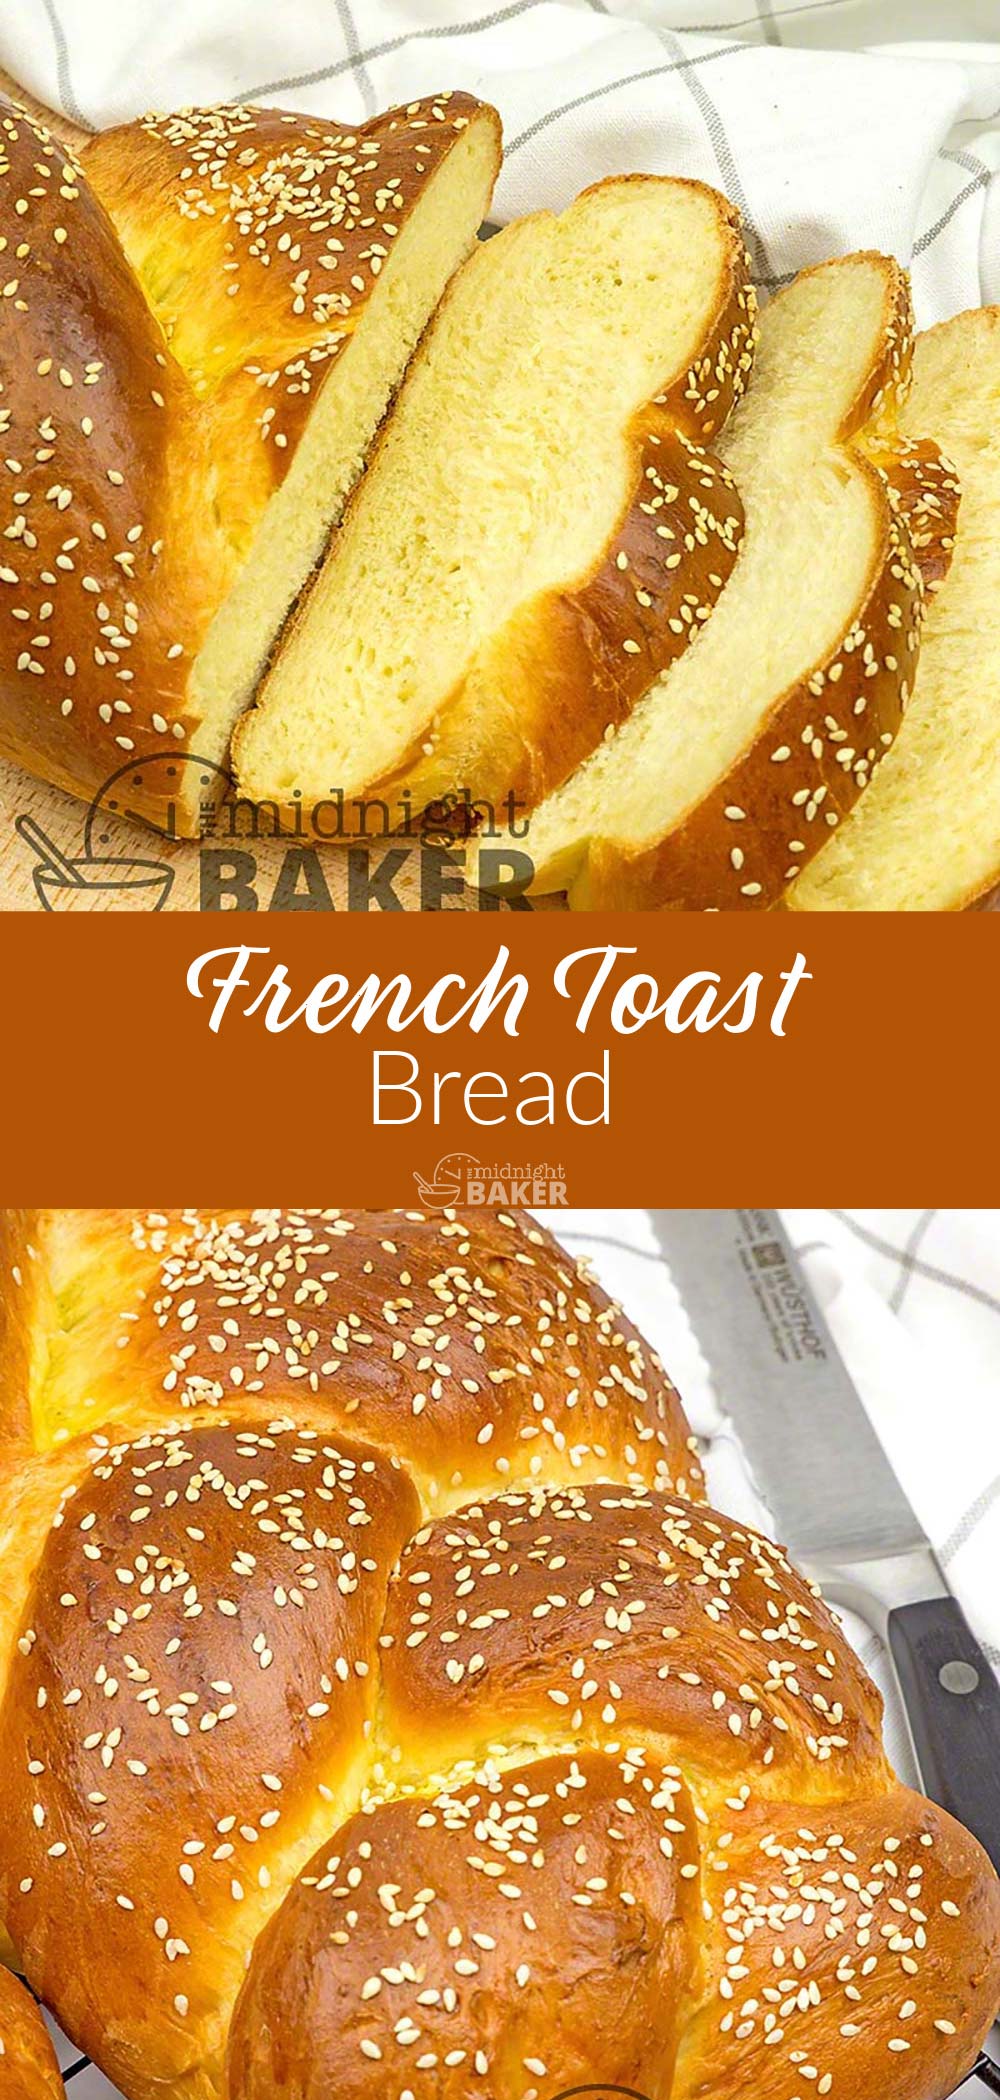 Make the best French toast with this easy French toast bread recipe.